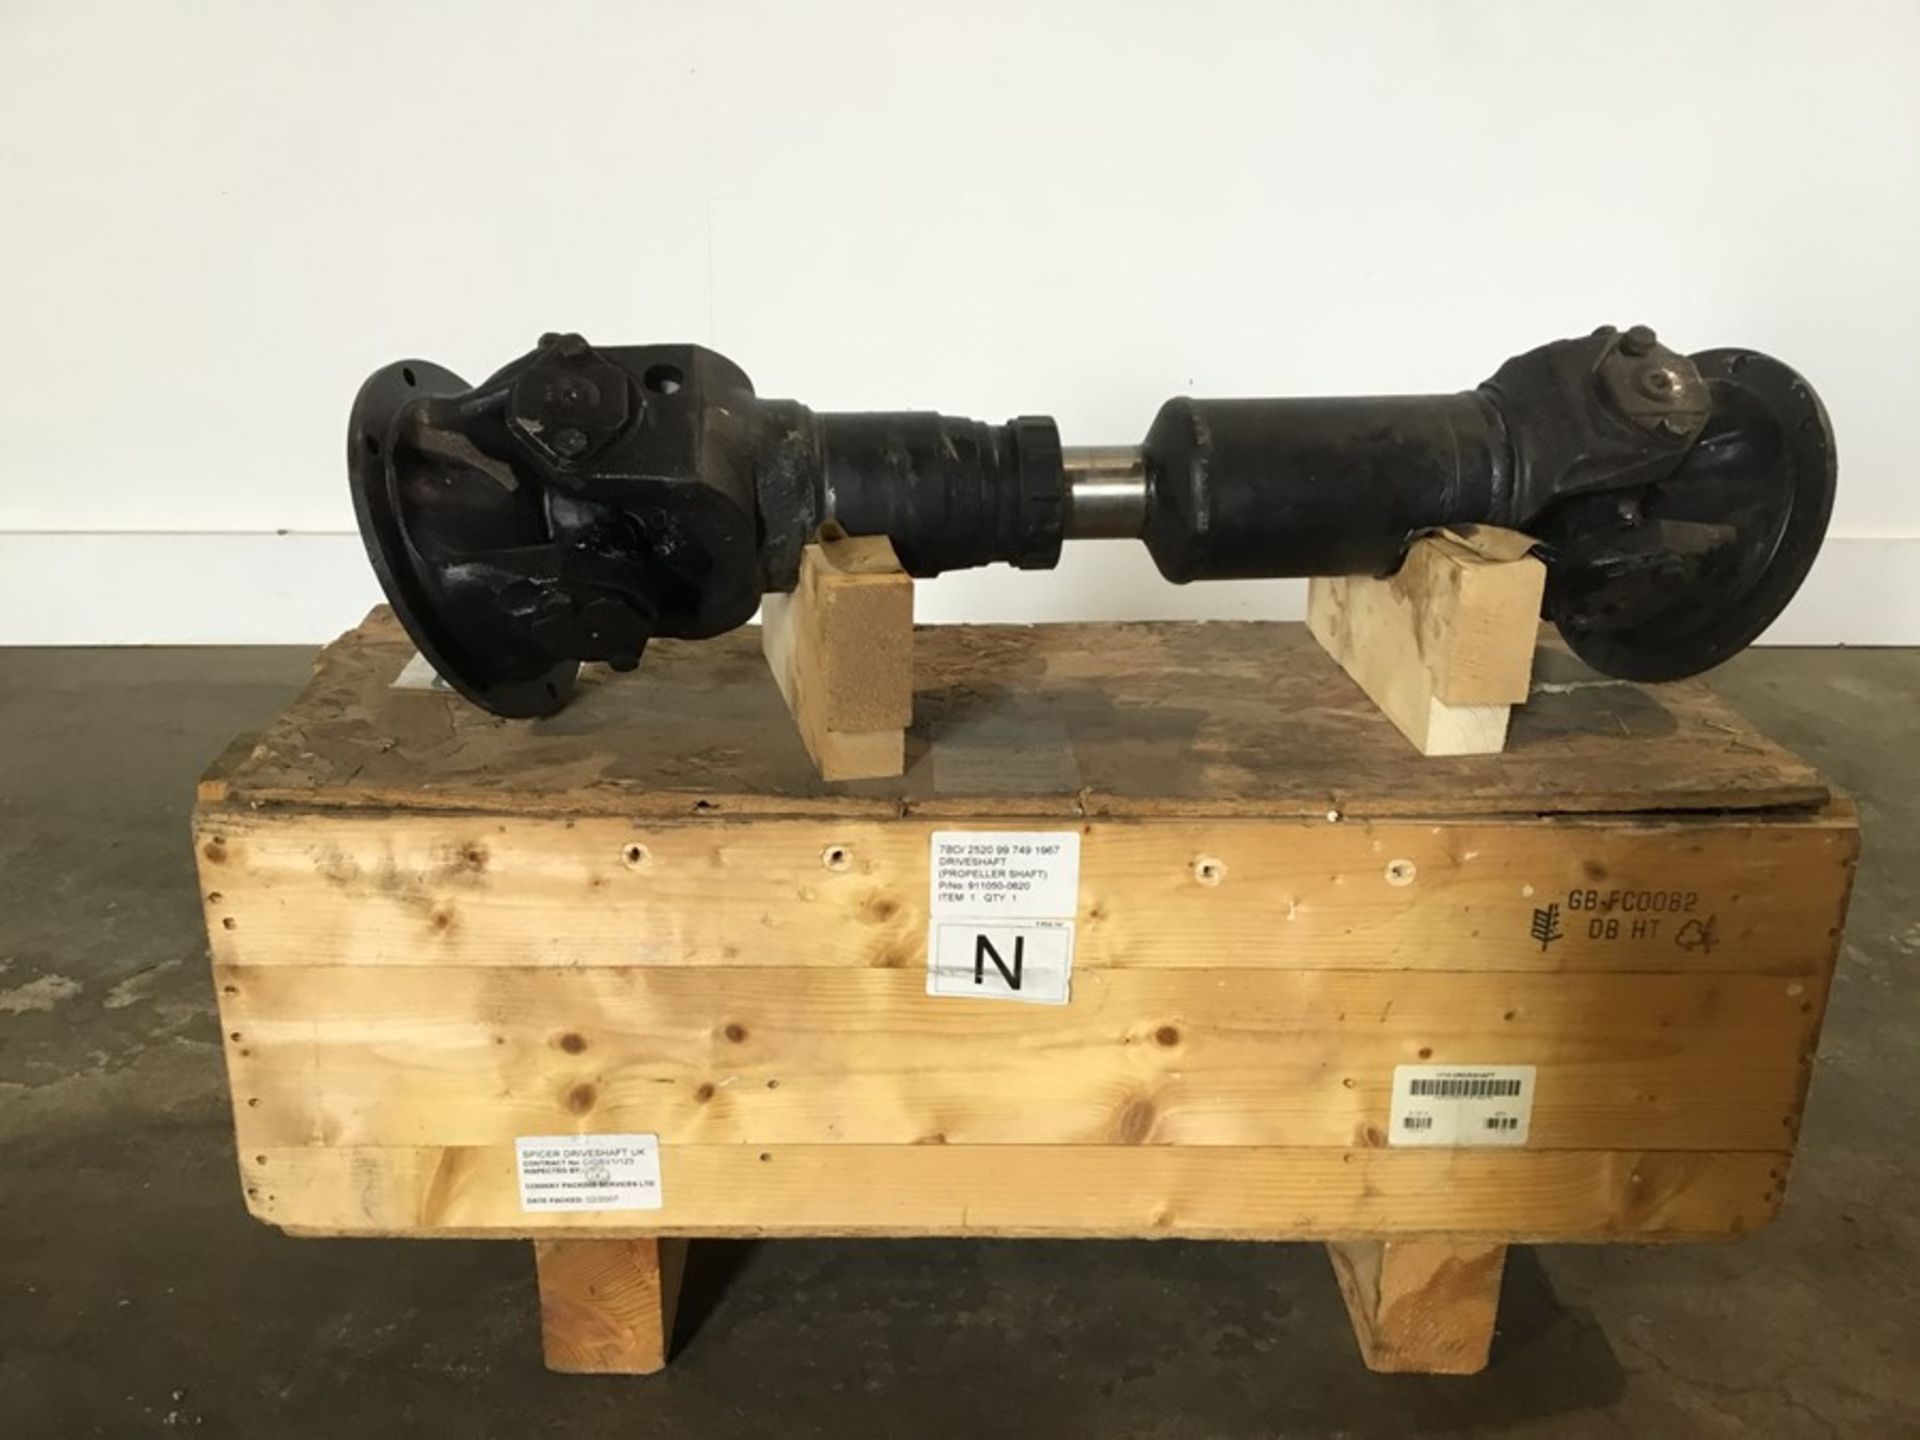 Stillage containing 18 Spicer 1710 propshaft/drive shaft new or refurbished in boxes - Image 14 of 18